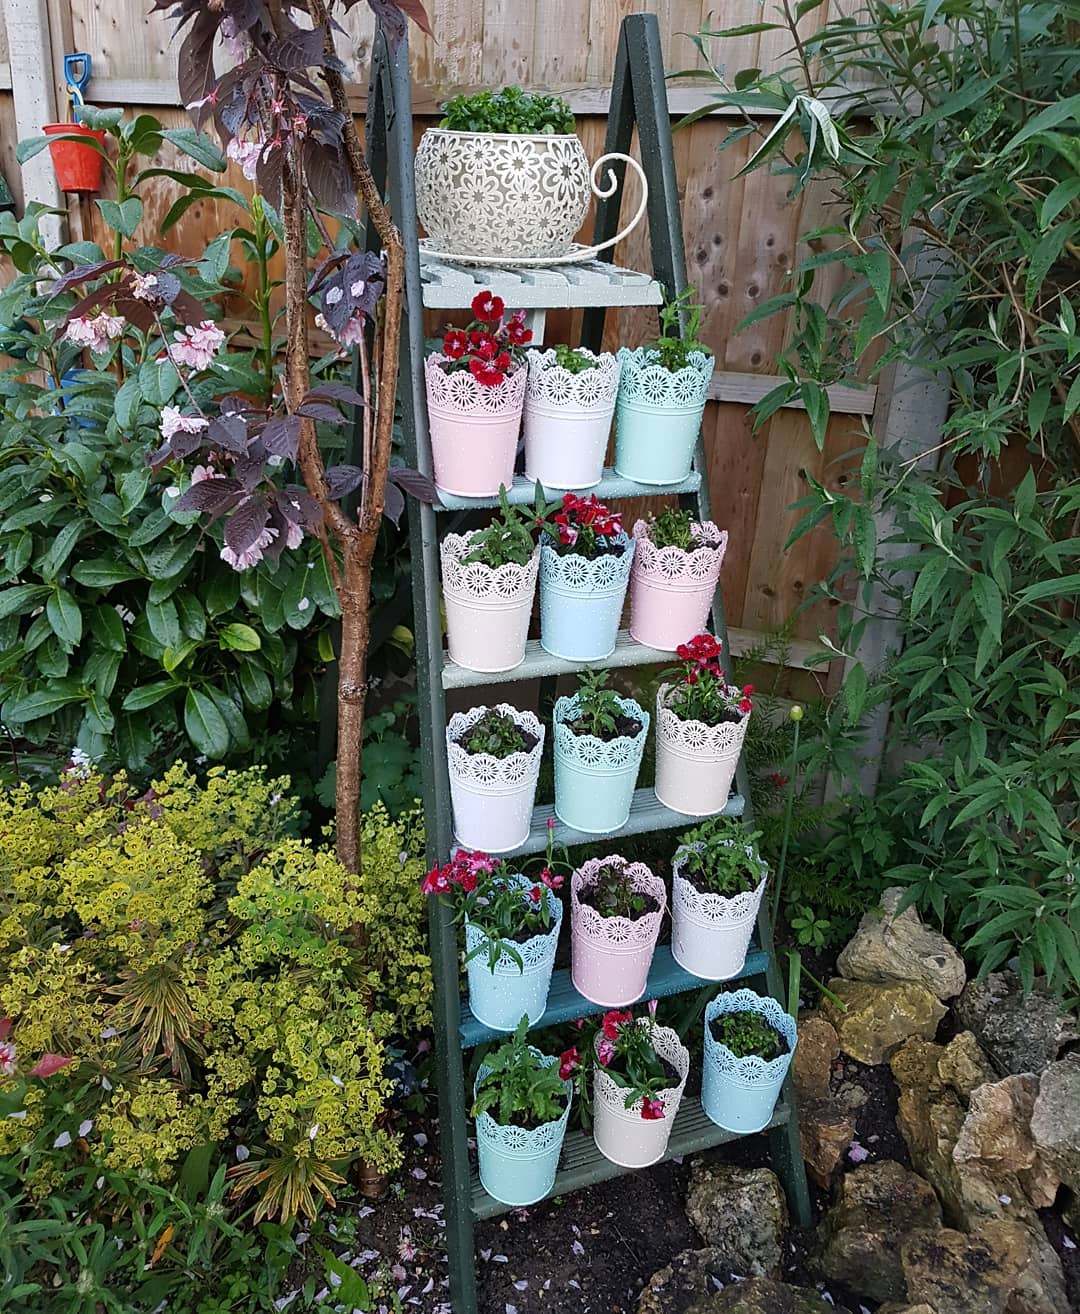 Decorate ladder with colorful metal pots and flowers. Photo via Instagram user @gpandhuman